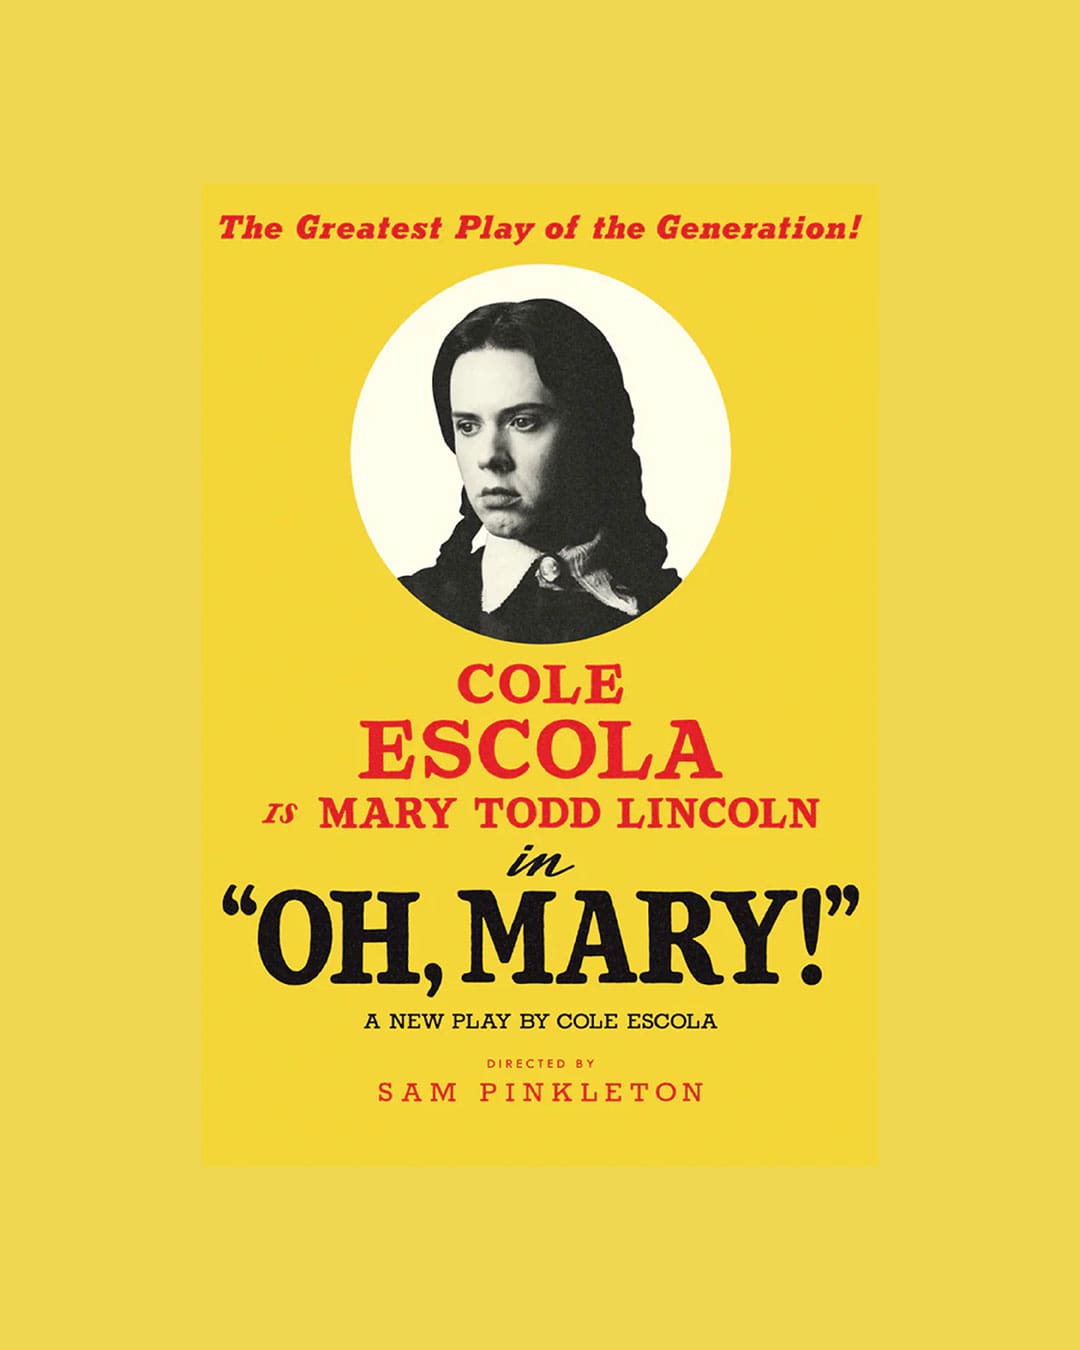 Poster for Cole Escola's Oh Mary! show